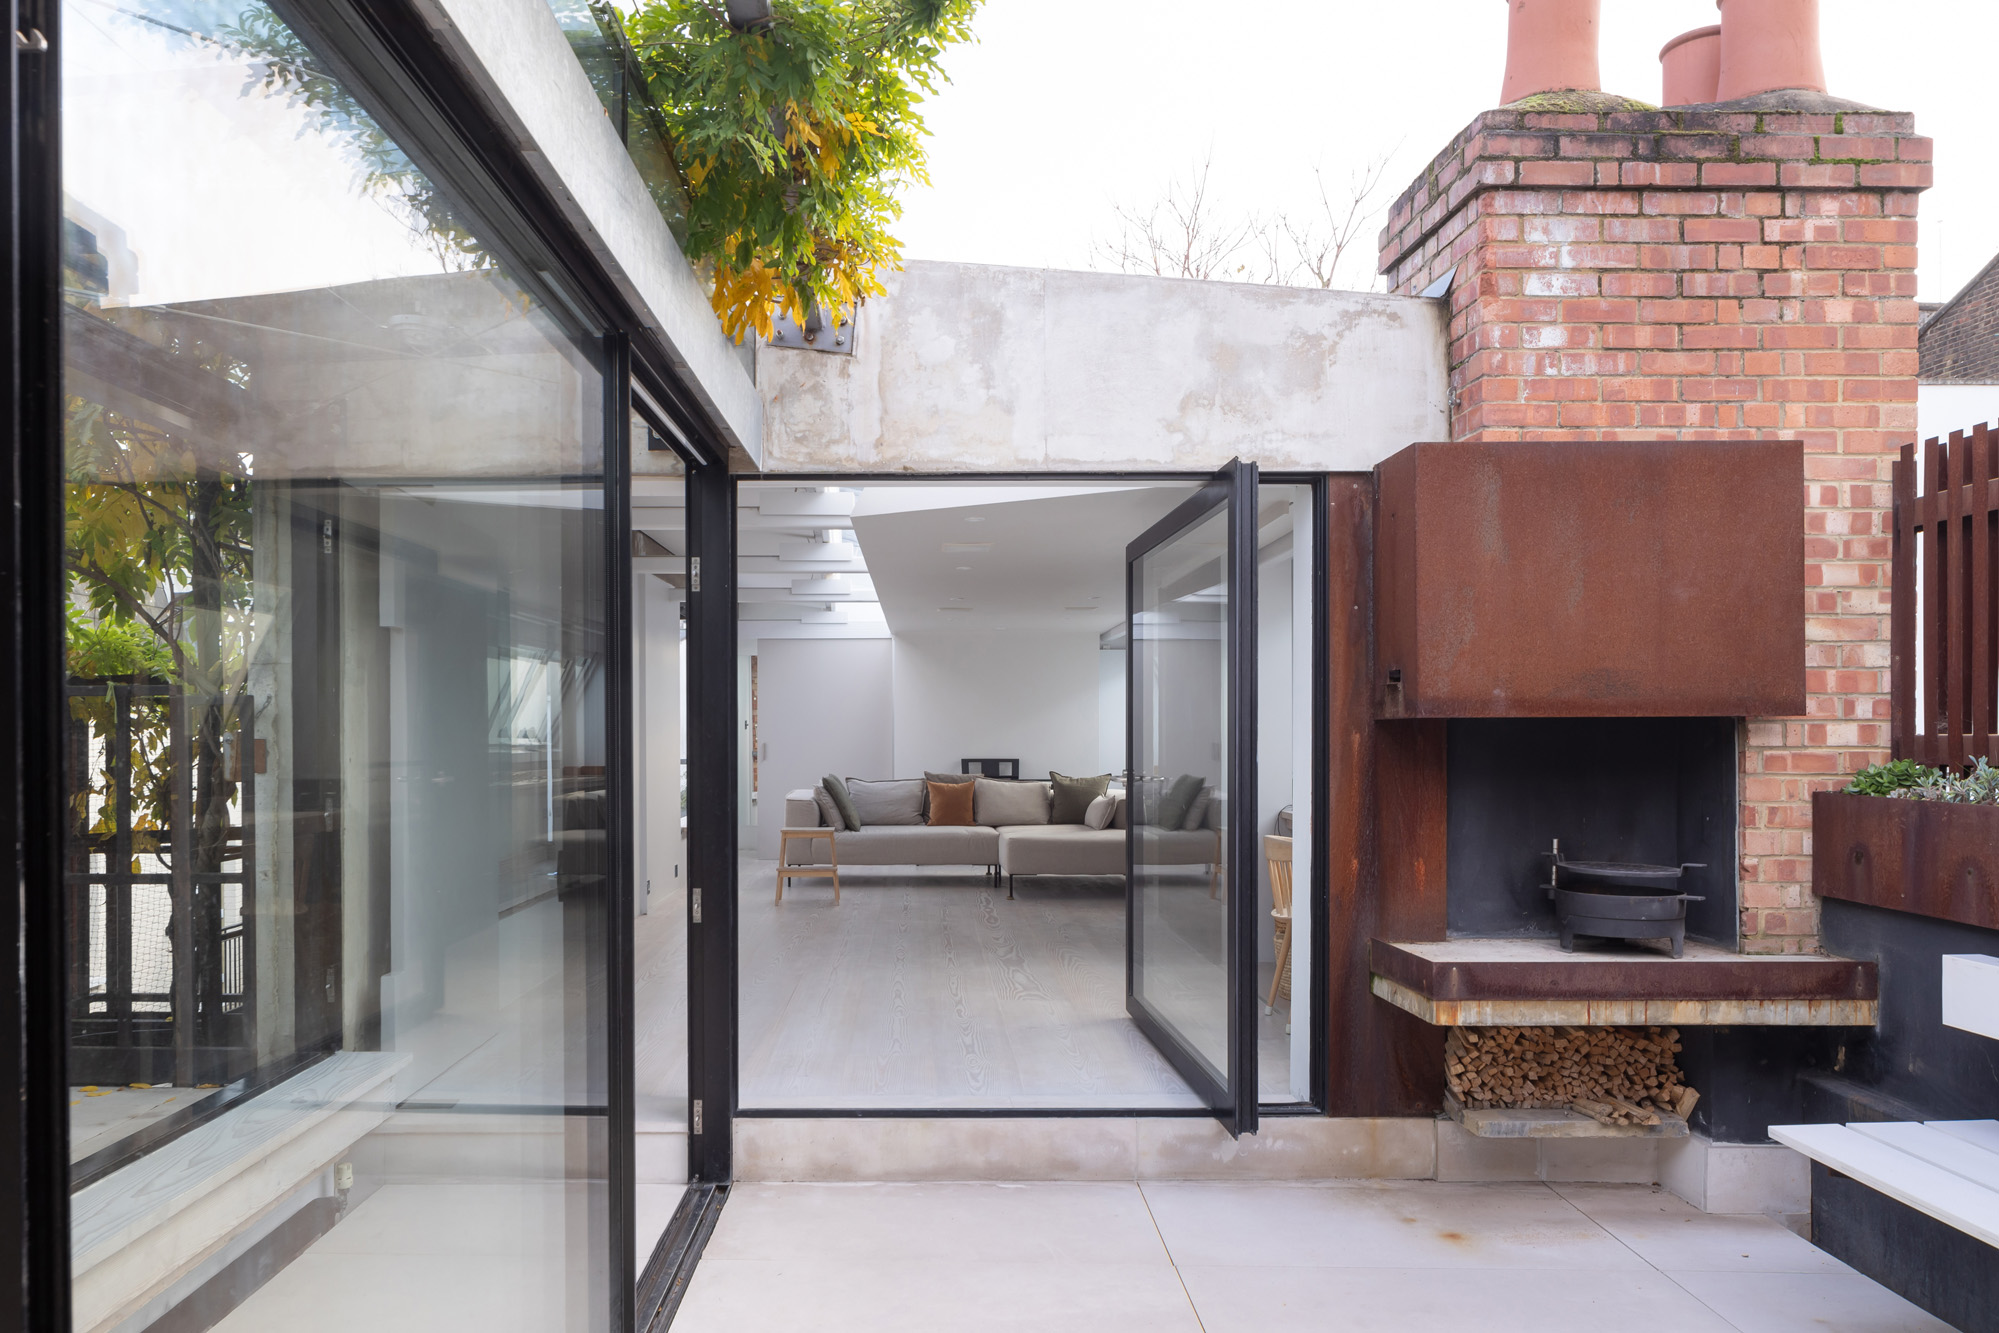 For Rent: Vernon Yard Notting Hill W11 - - contemporary roof terrace with full-height glazing